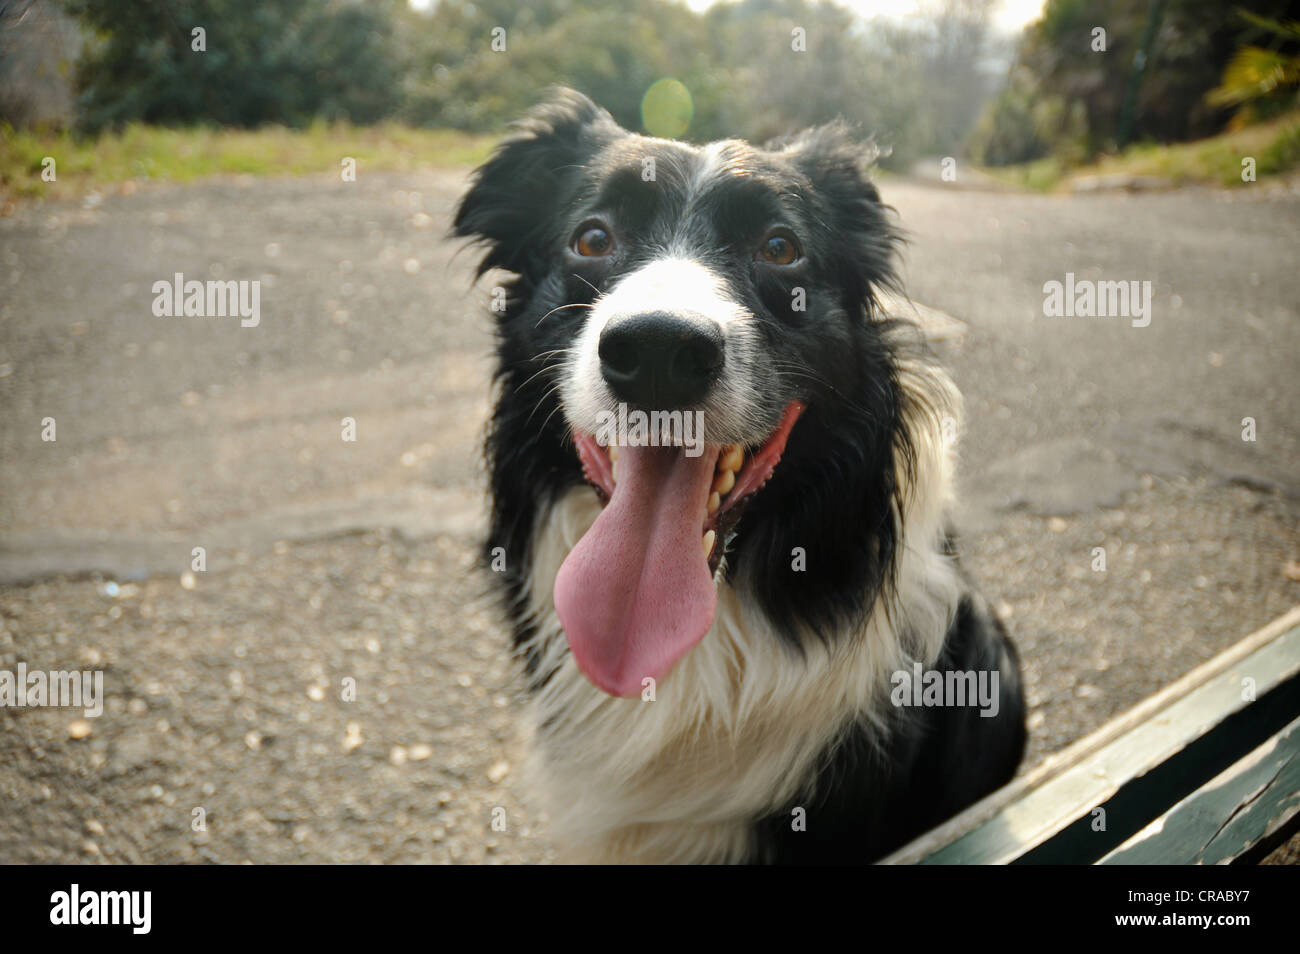 Close up of dogs panting face Stock Photo